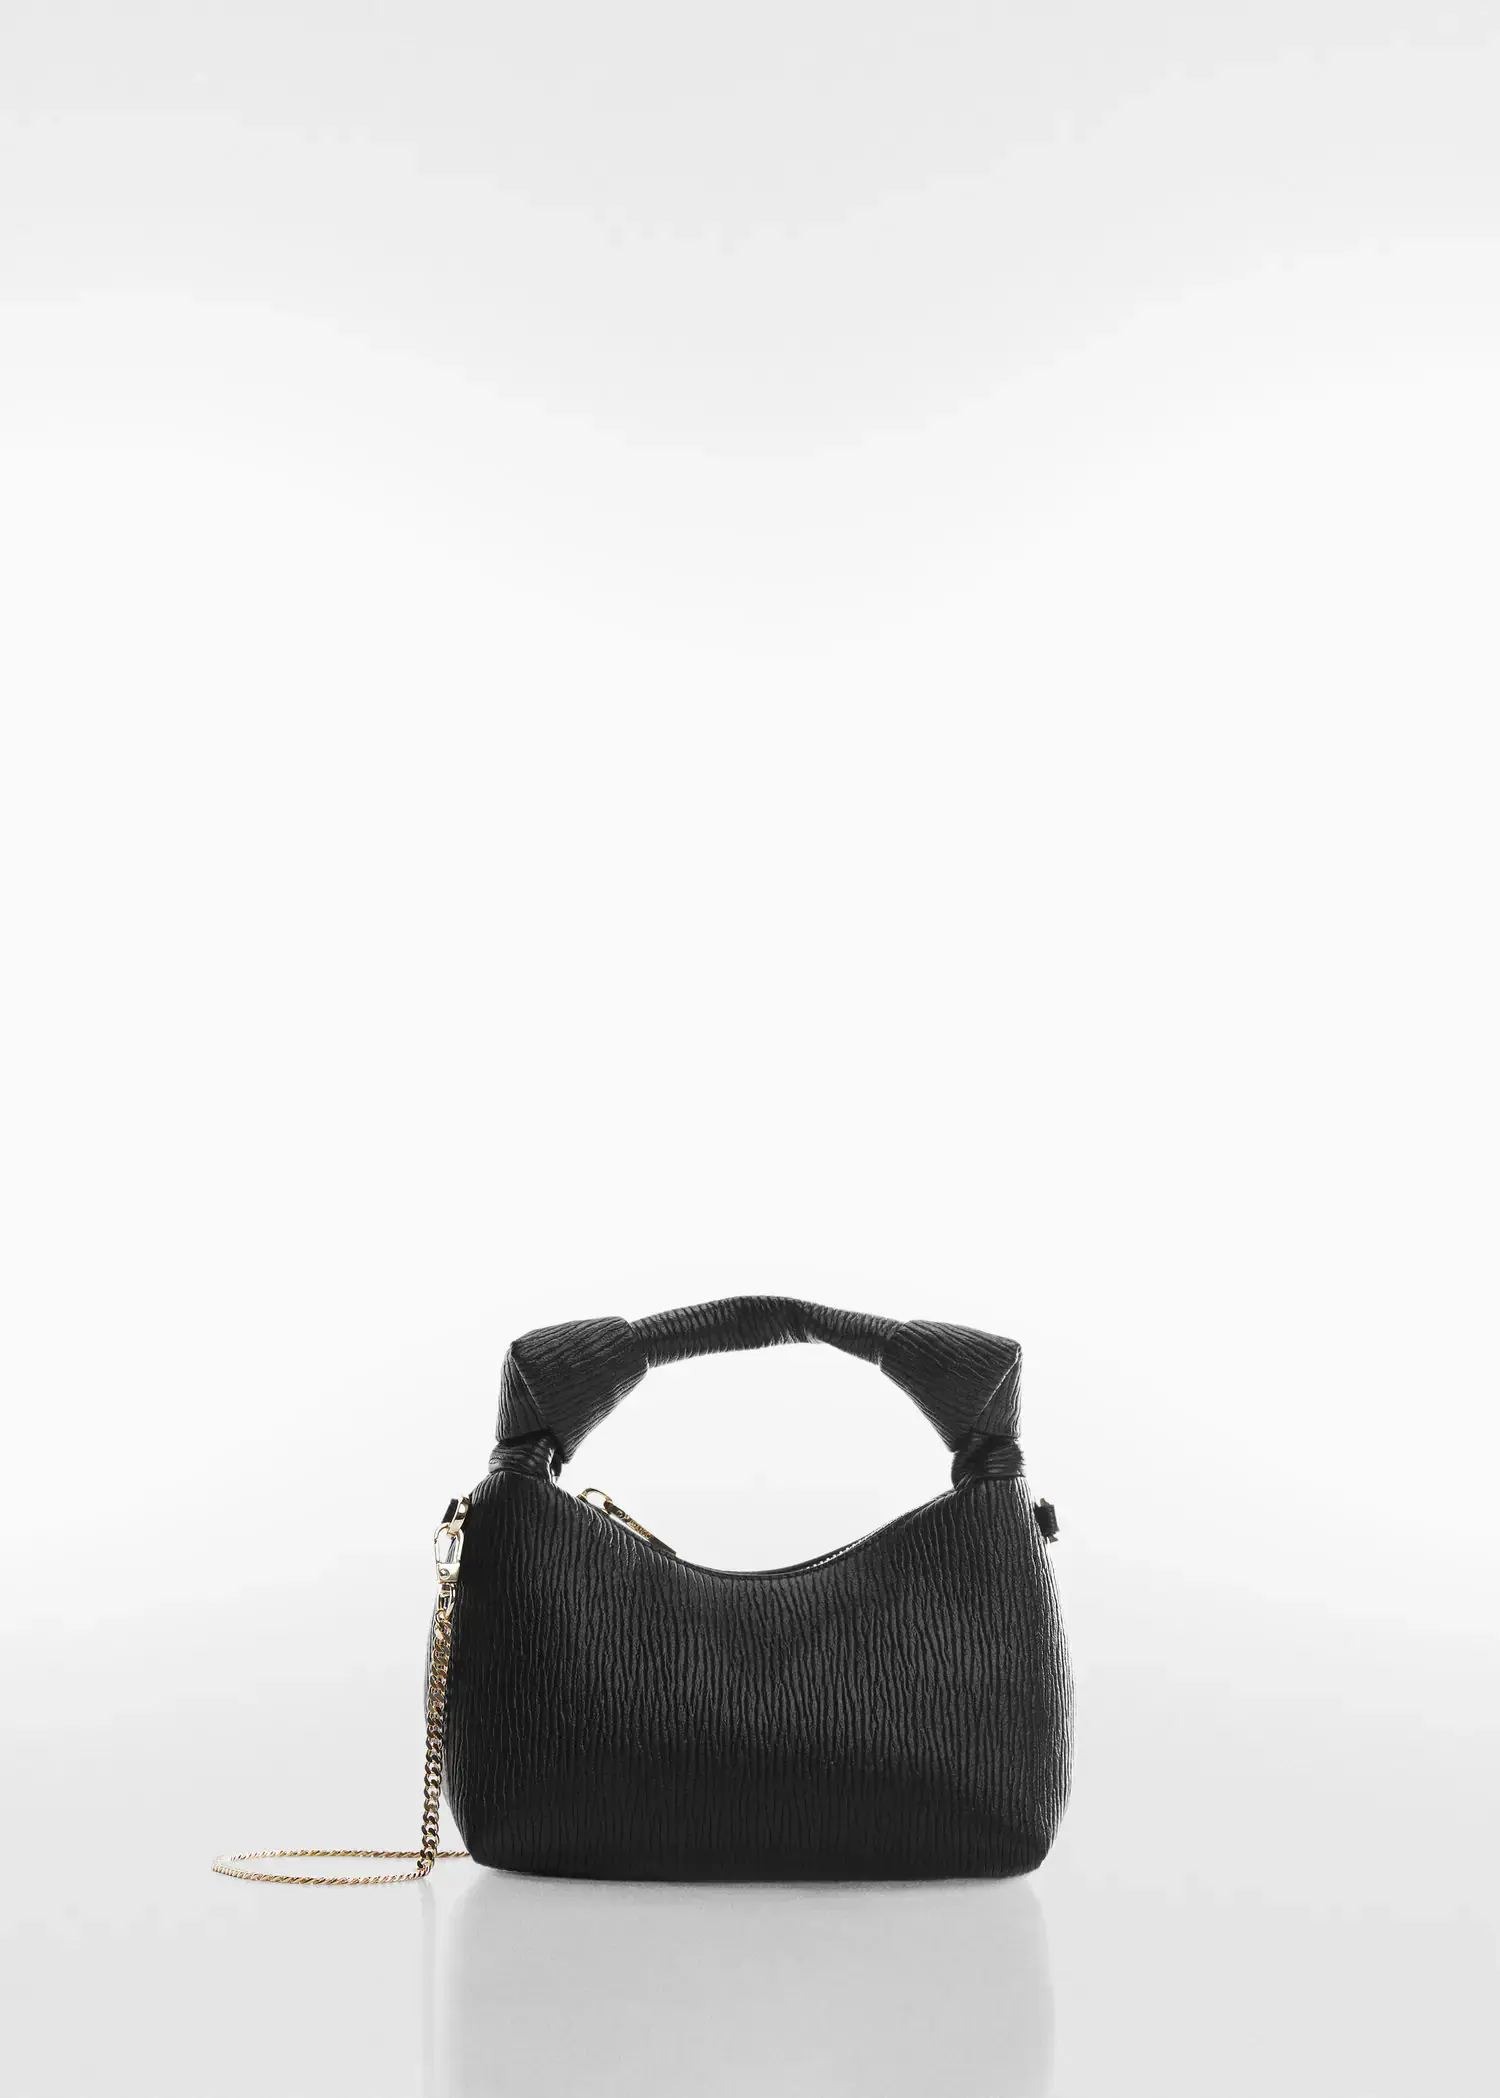 Mango Textured knot handle bag. a close up of a black bag on a white background 